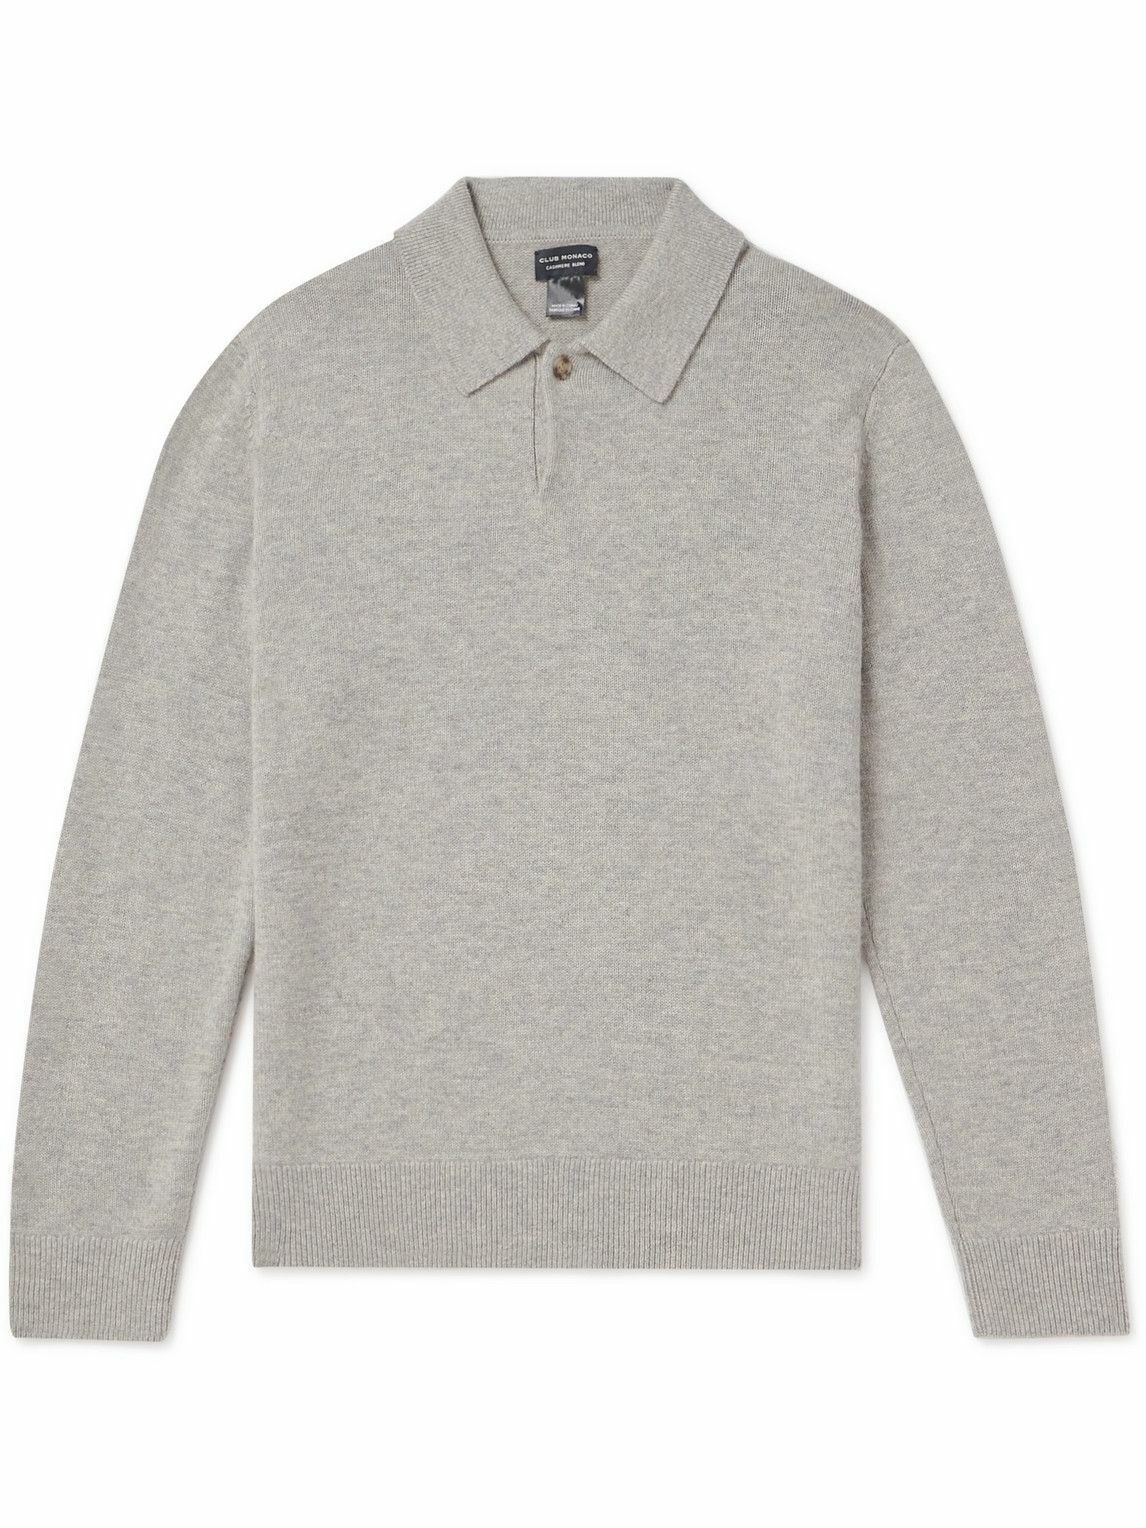 Photo: Club Monaco - Wool and Cashmere-Blend Polo Sweater - Gray